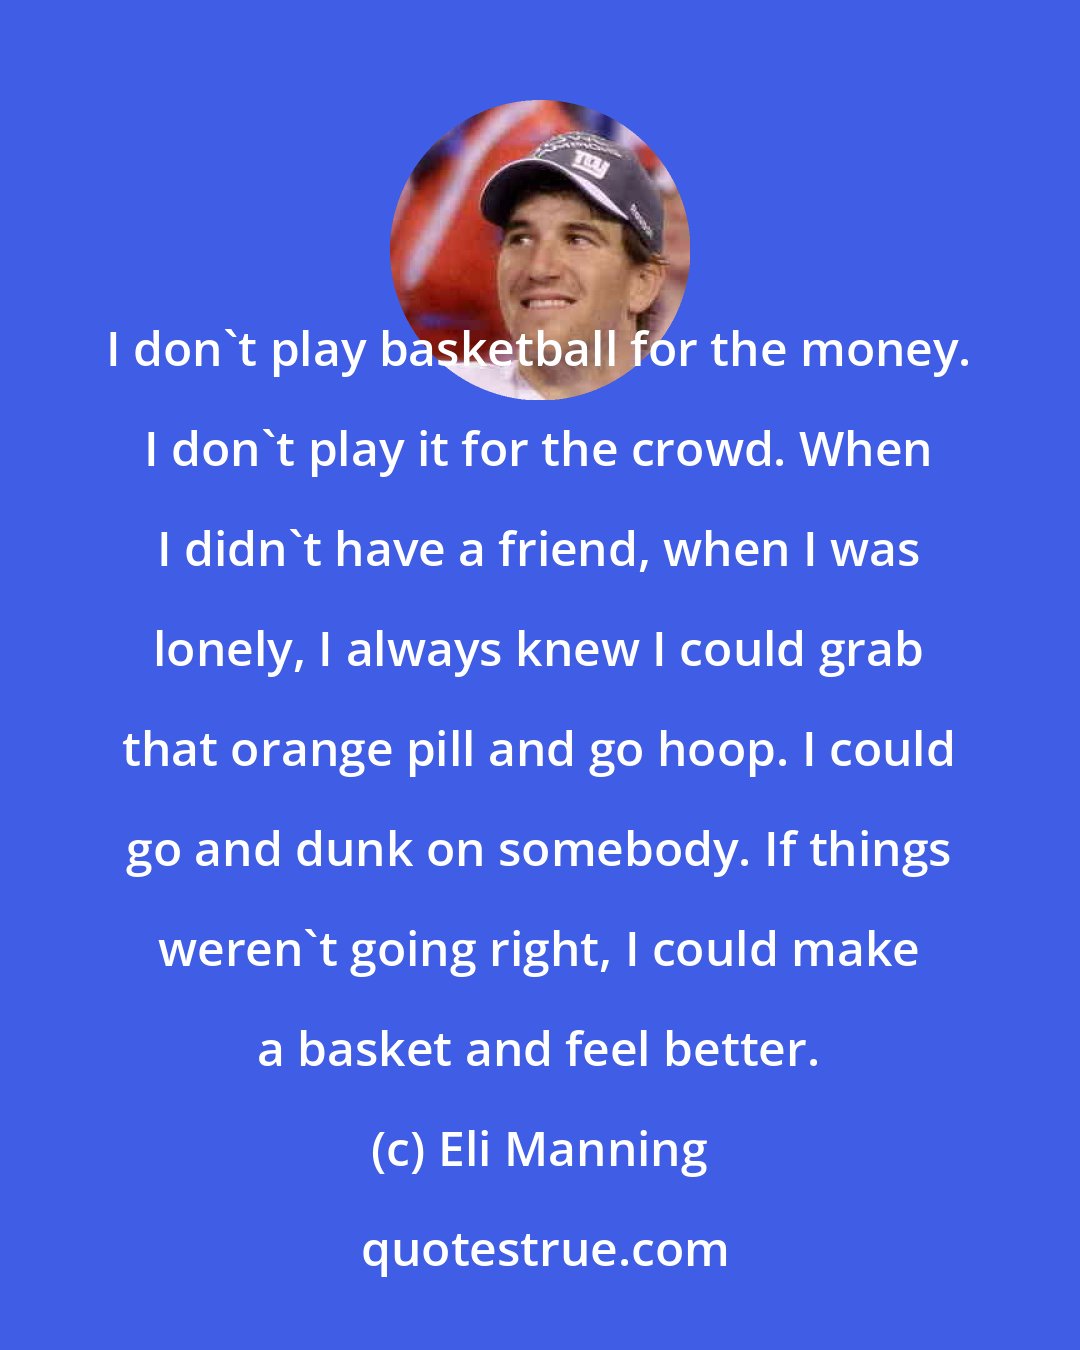 Eli Manning: I don't play basketball for the money. I don't play it for the crowd. When I didn't have a friend, when I was lonely, I always knew I could grab that orange pill and go hoop. I could go and dunk on somebody. If things weren't going right, I could make a basket and feel better.